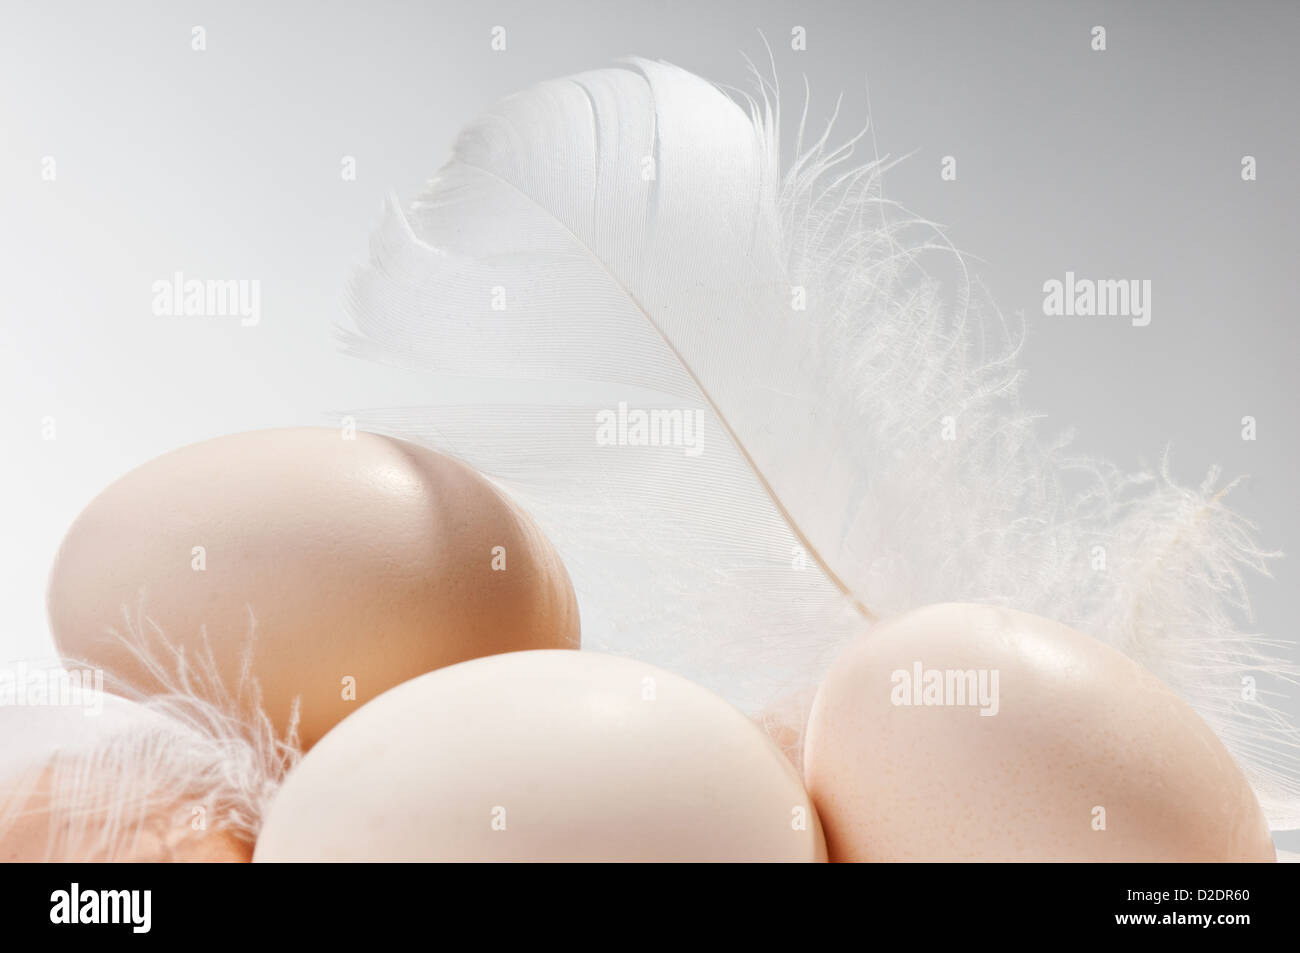 raw eggs in shells and white fluffy feather Stock Photo